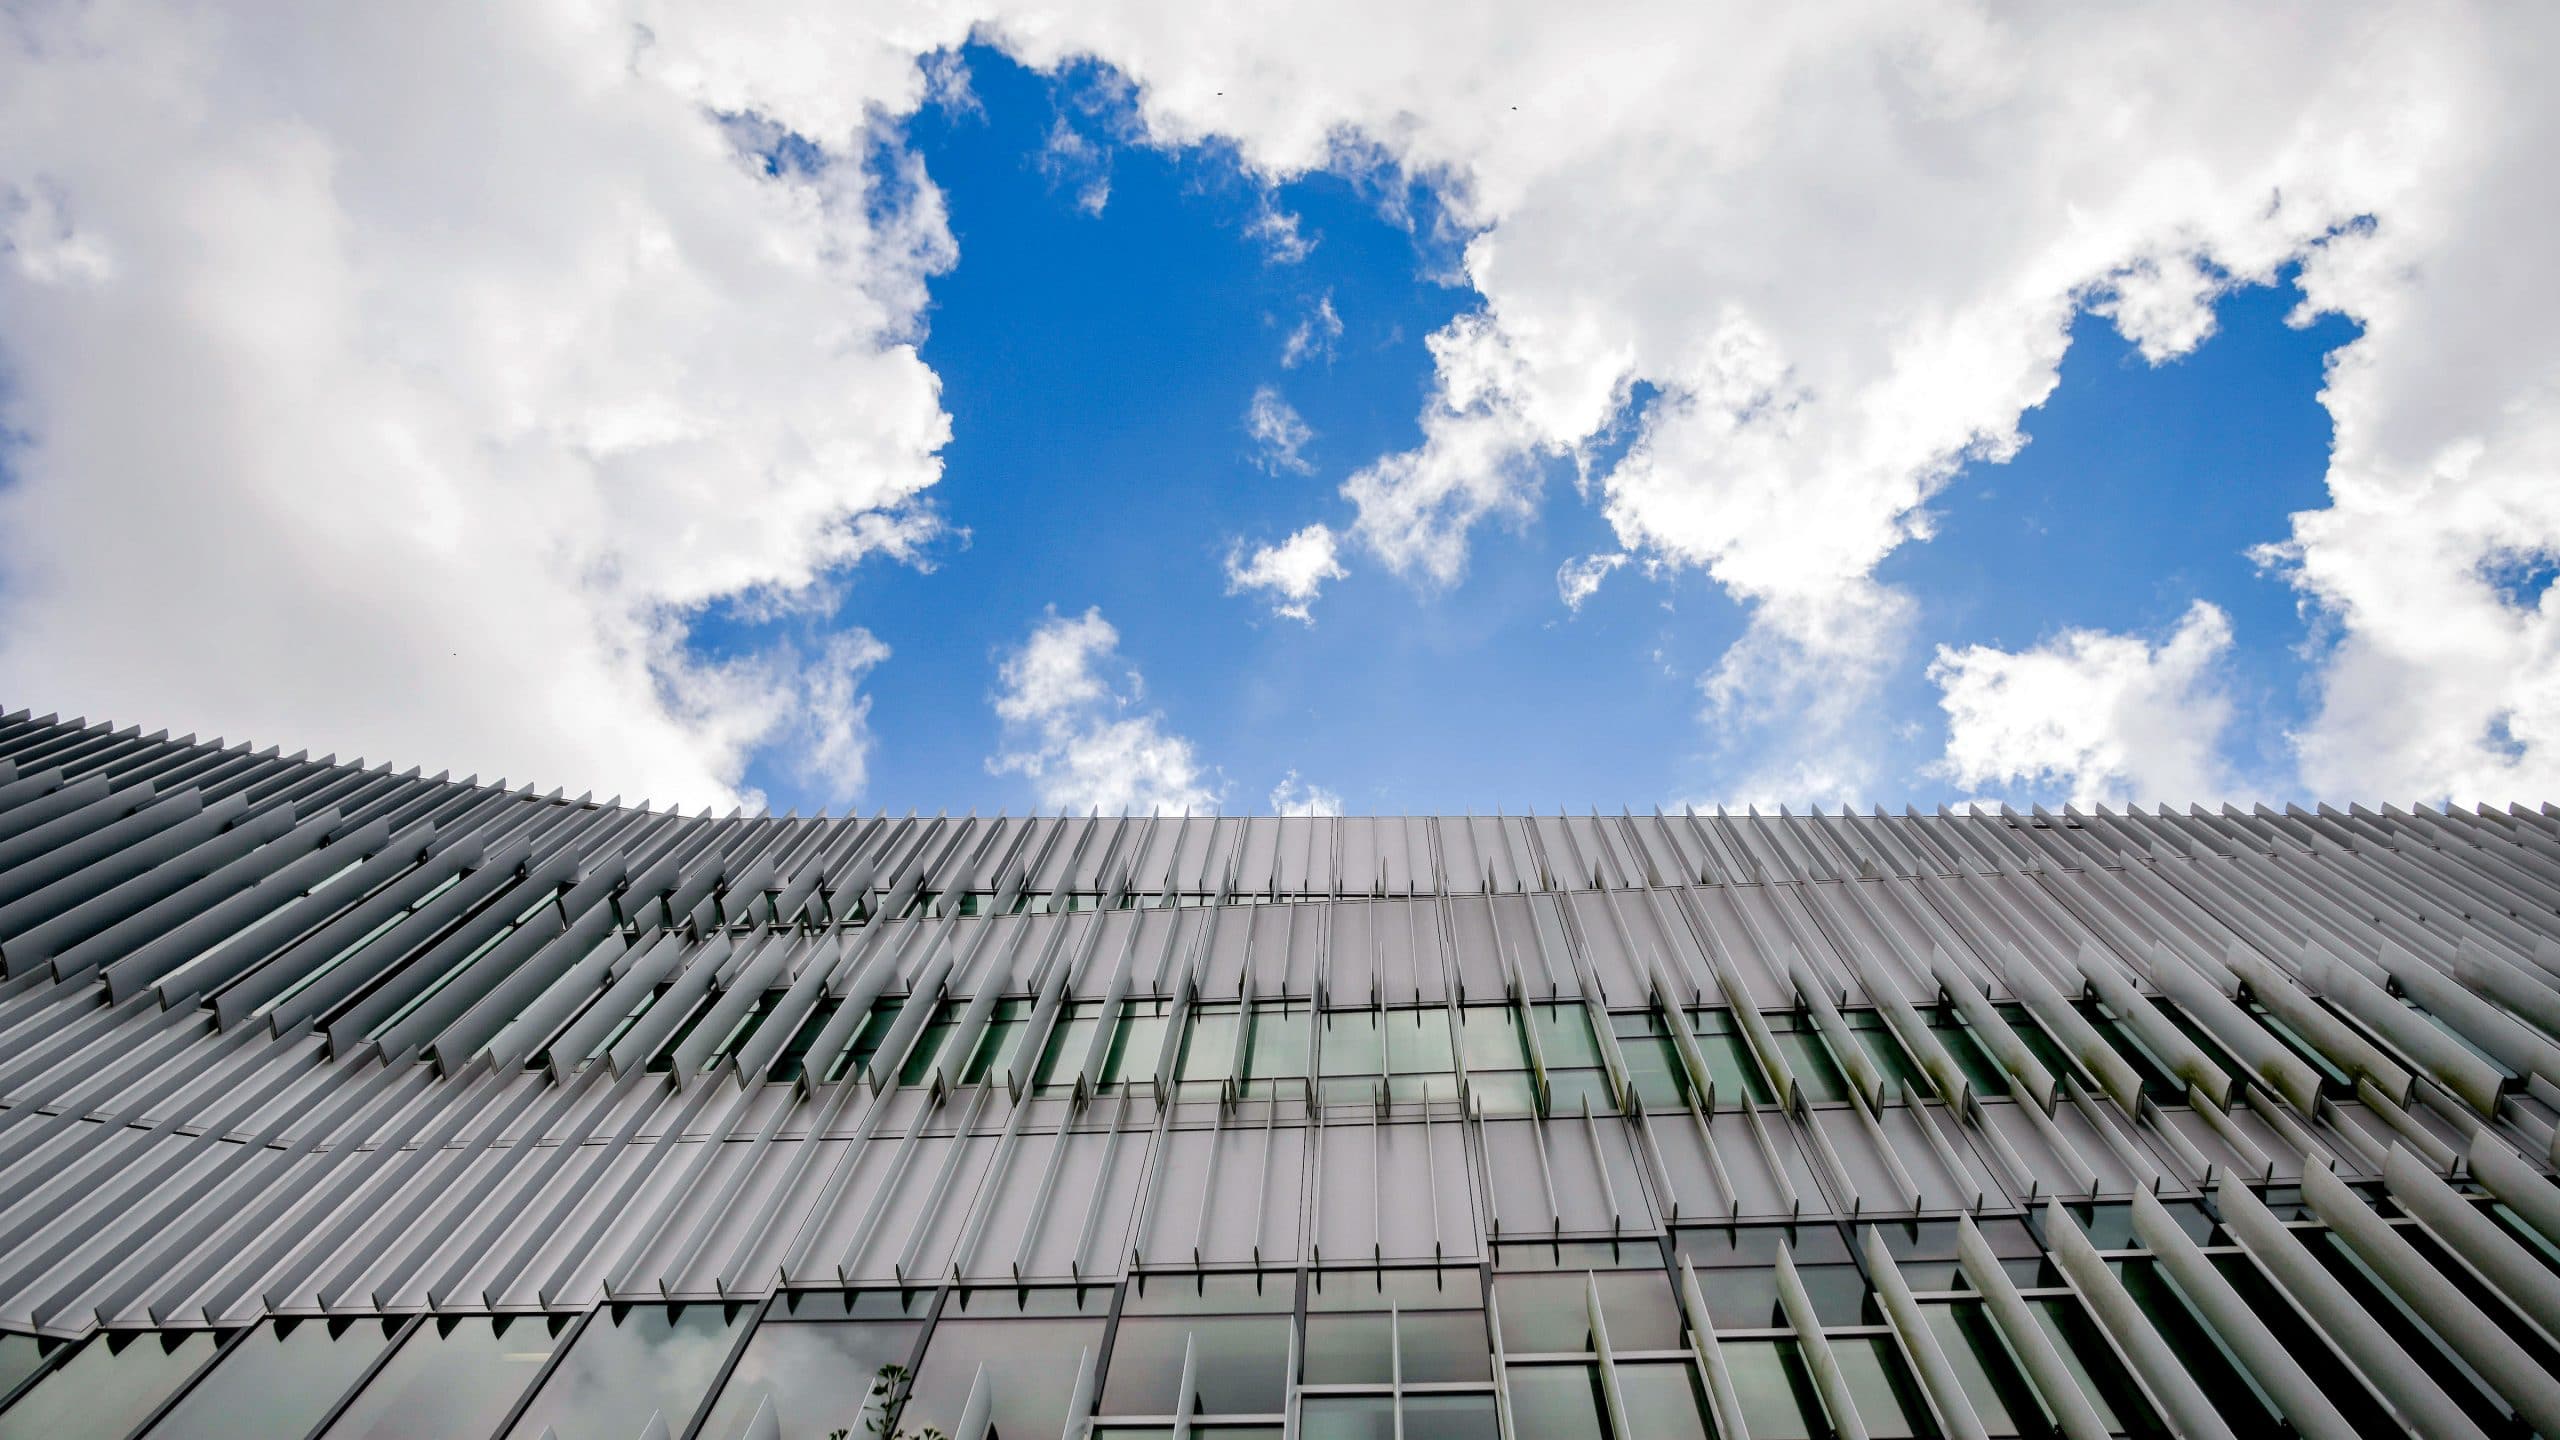 Hunt Library under parting clouds and blue skies.